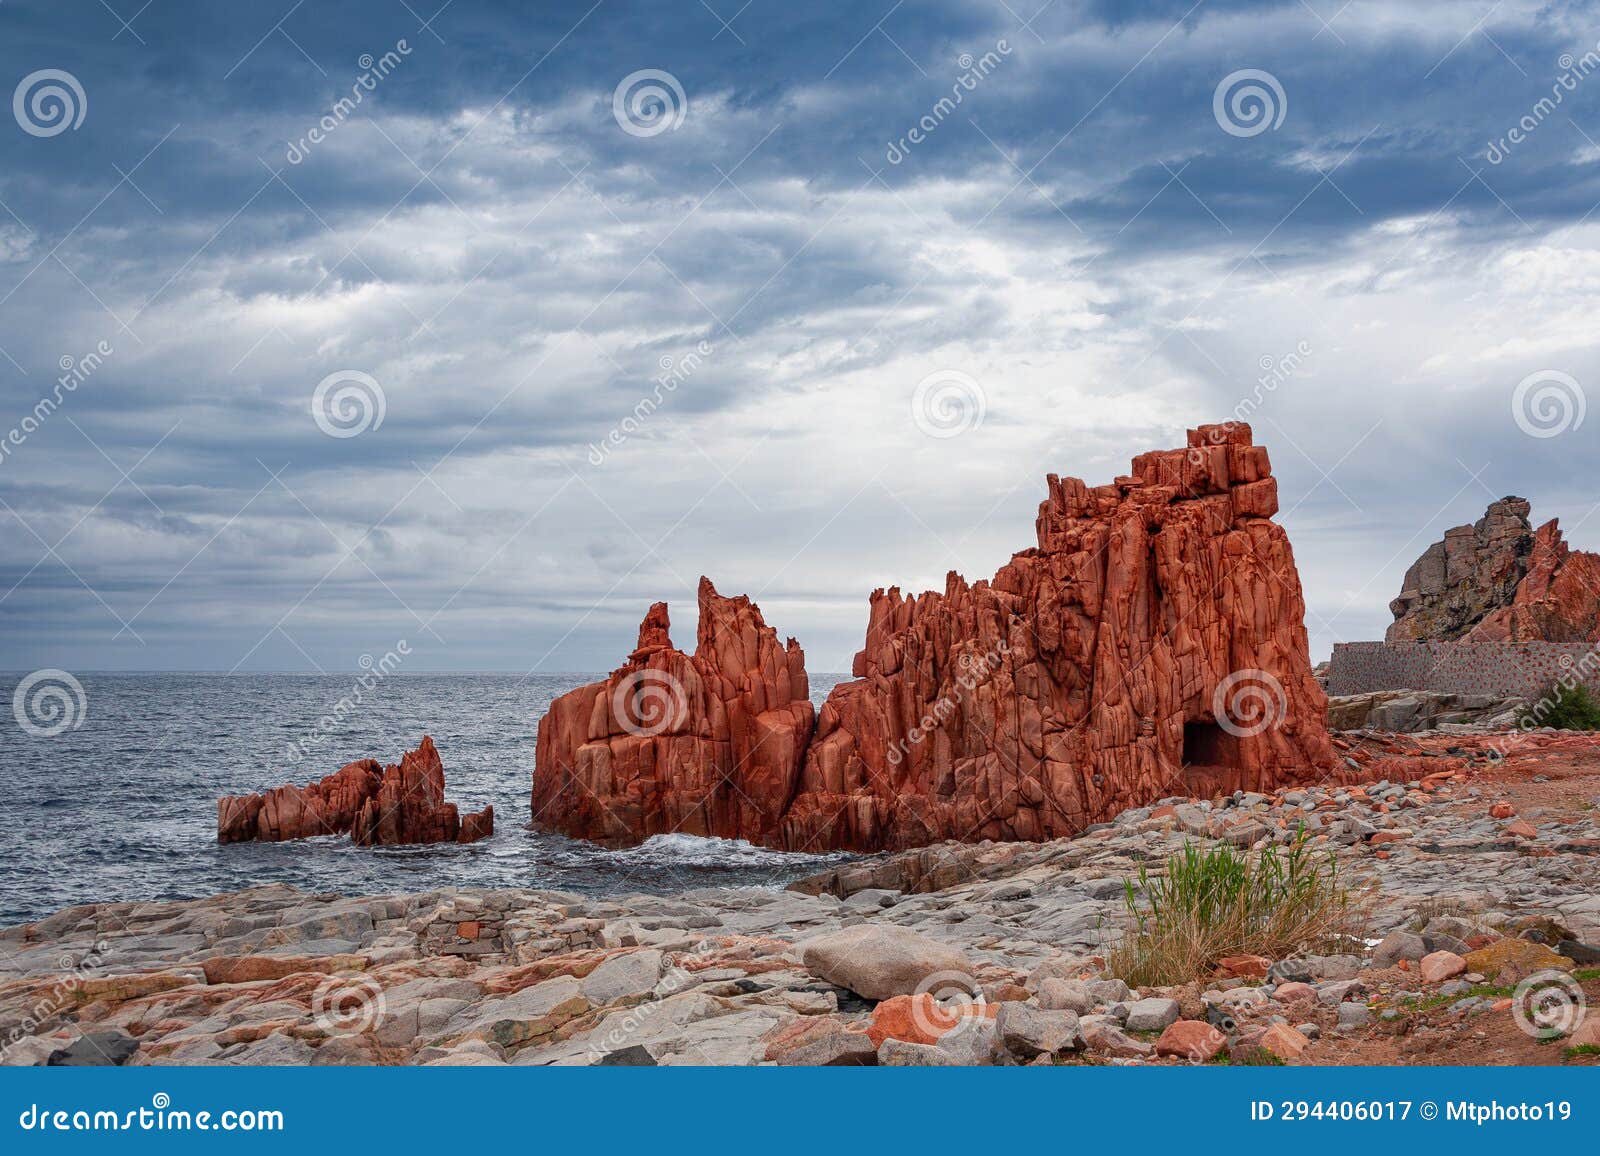 rocce rosse rock formations in sardinia, italy